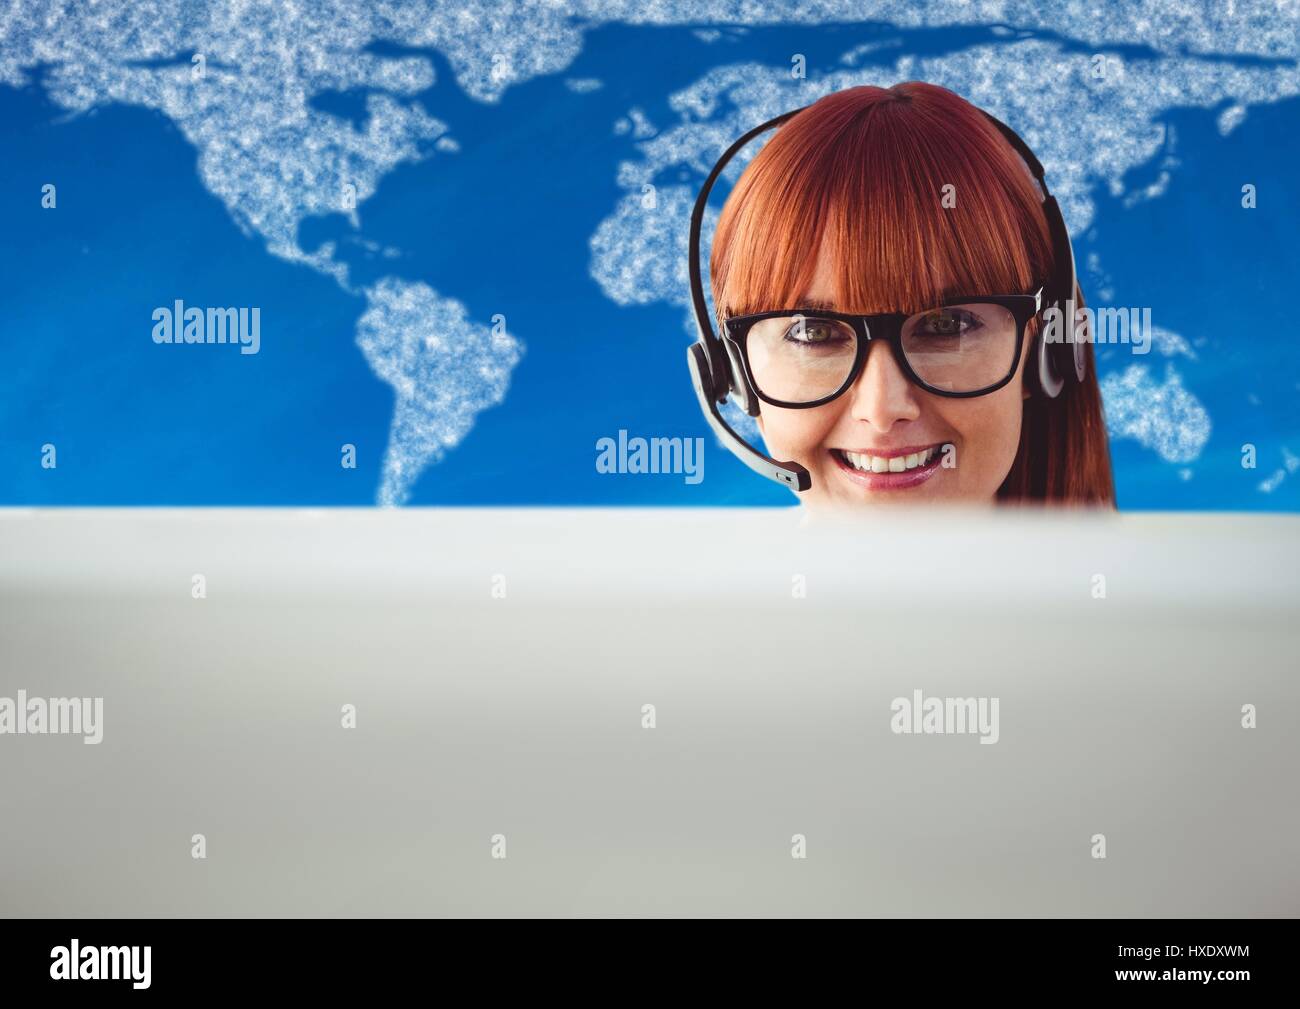 Digital composite of Travel agent behind computer against map with clouds and blue background Stock Photo